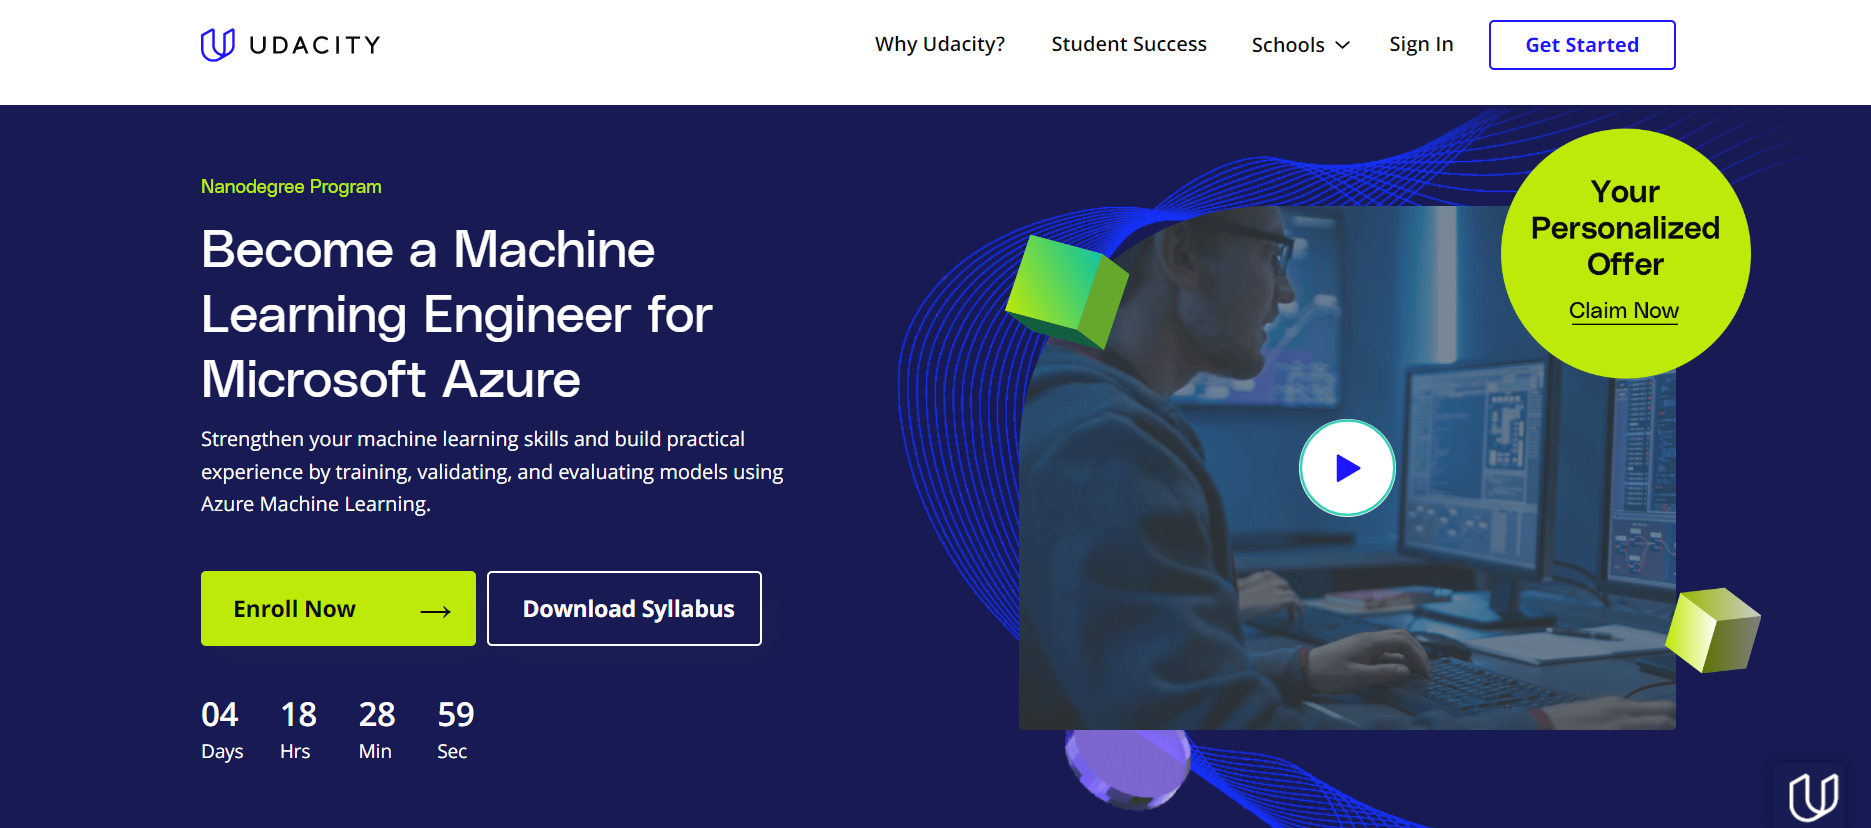 Become a Machine Learning Engineer for Microsoft Azure